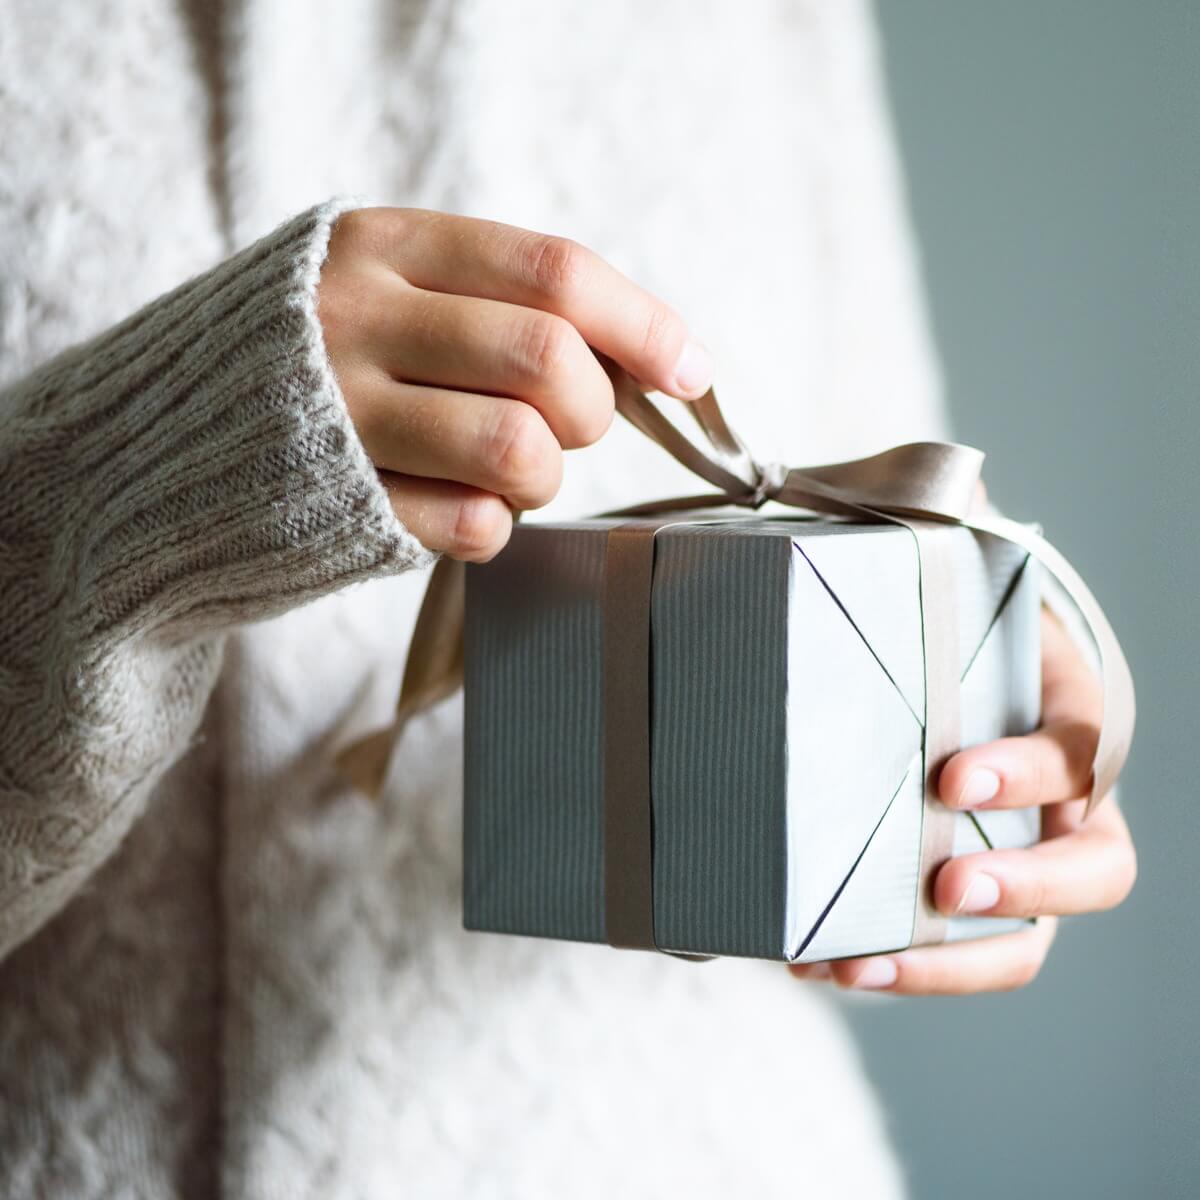 7 amazing Christmas gift ideas for large families